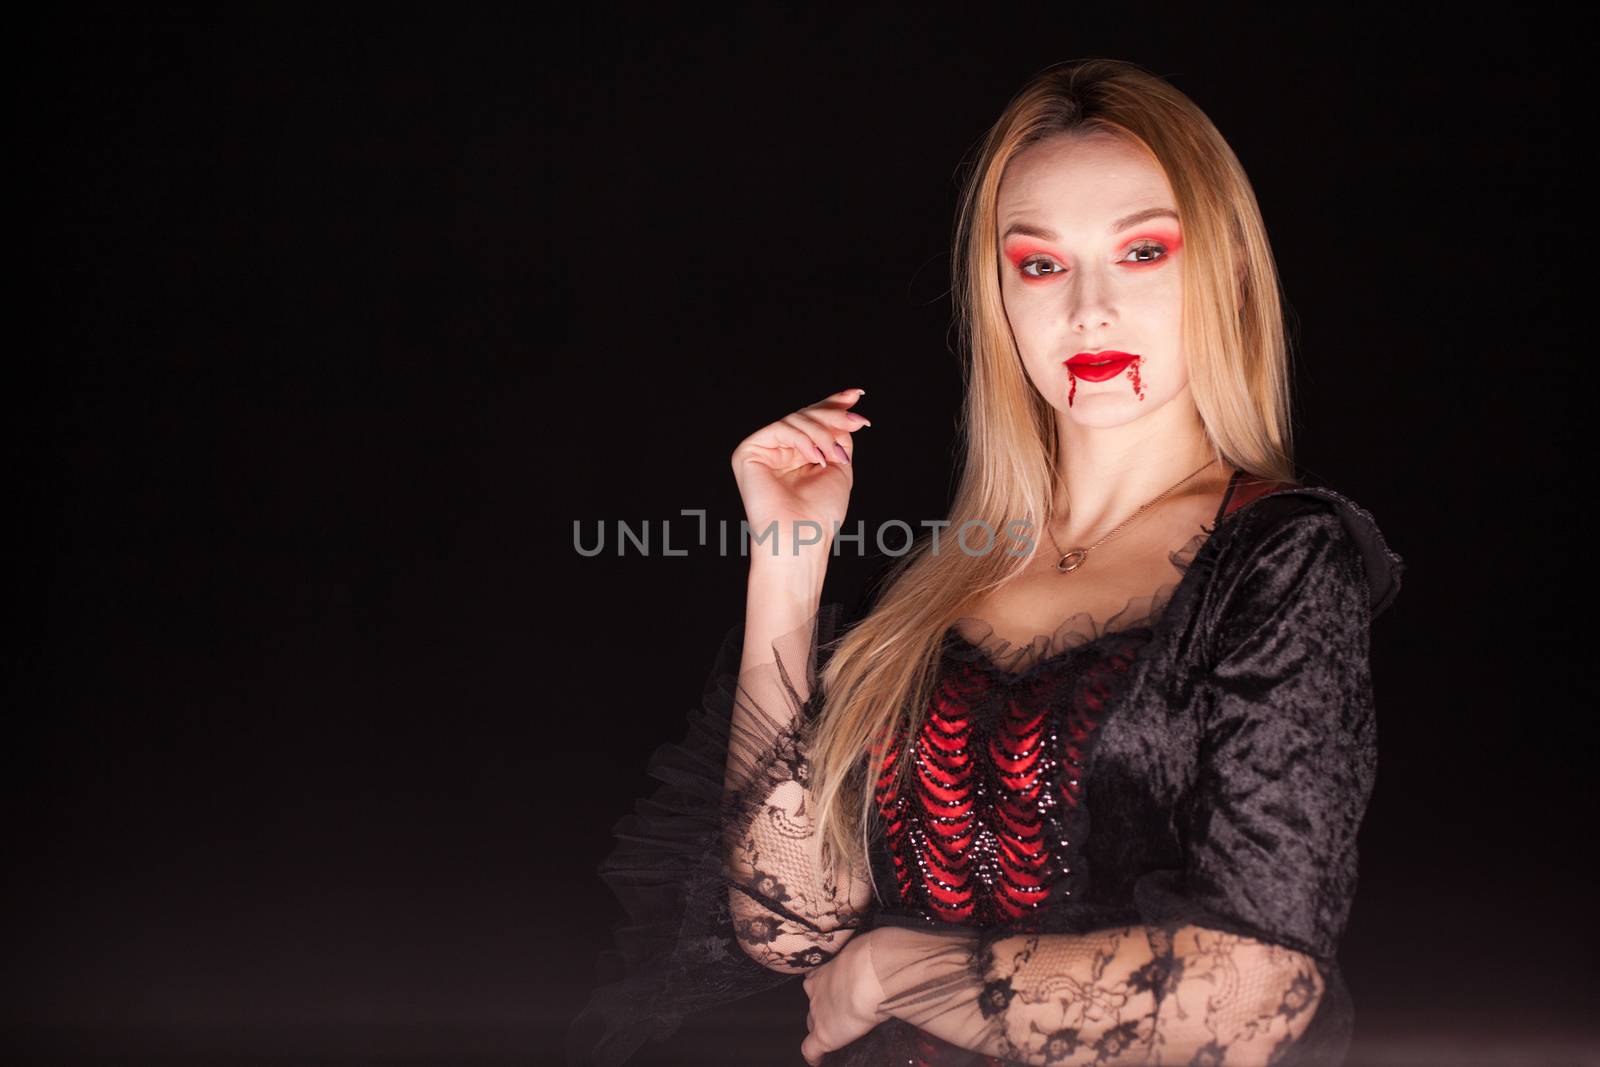 Lady of death with dripping blood from lips over black background. Halloween costume.